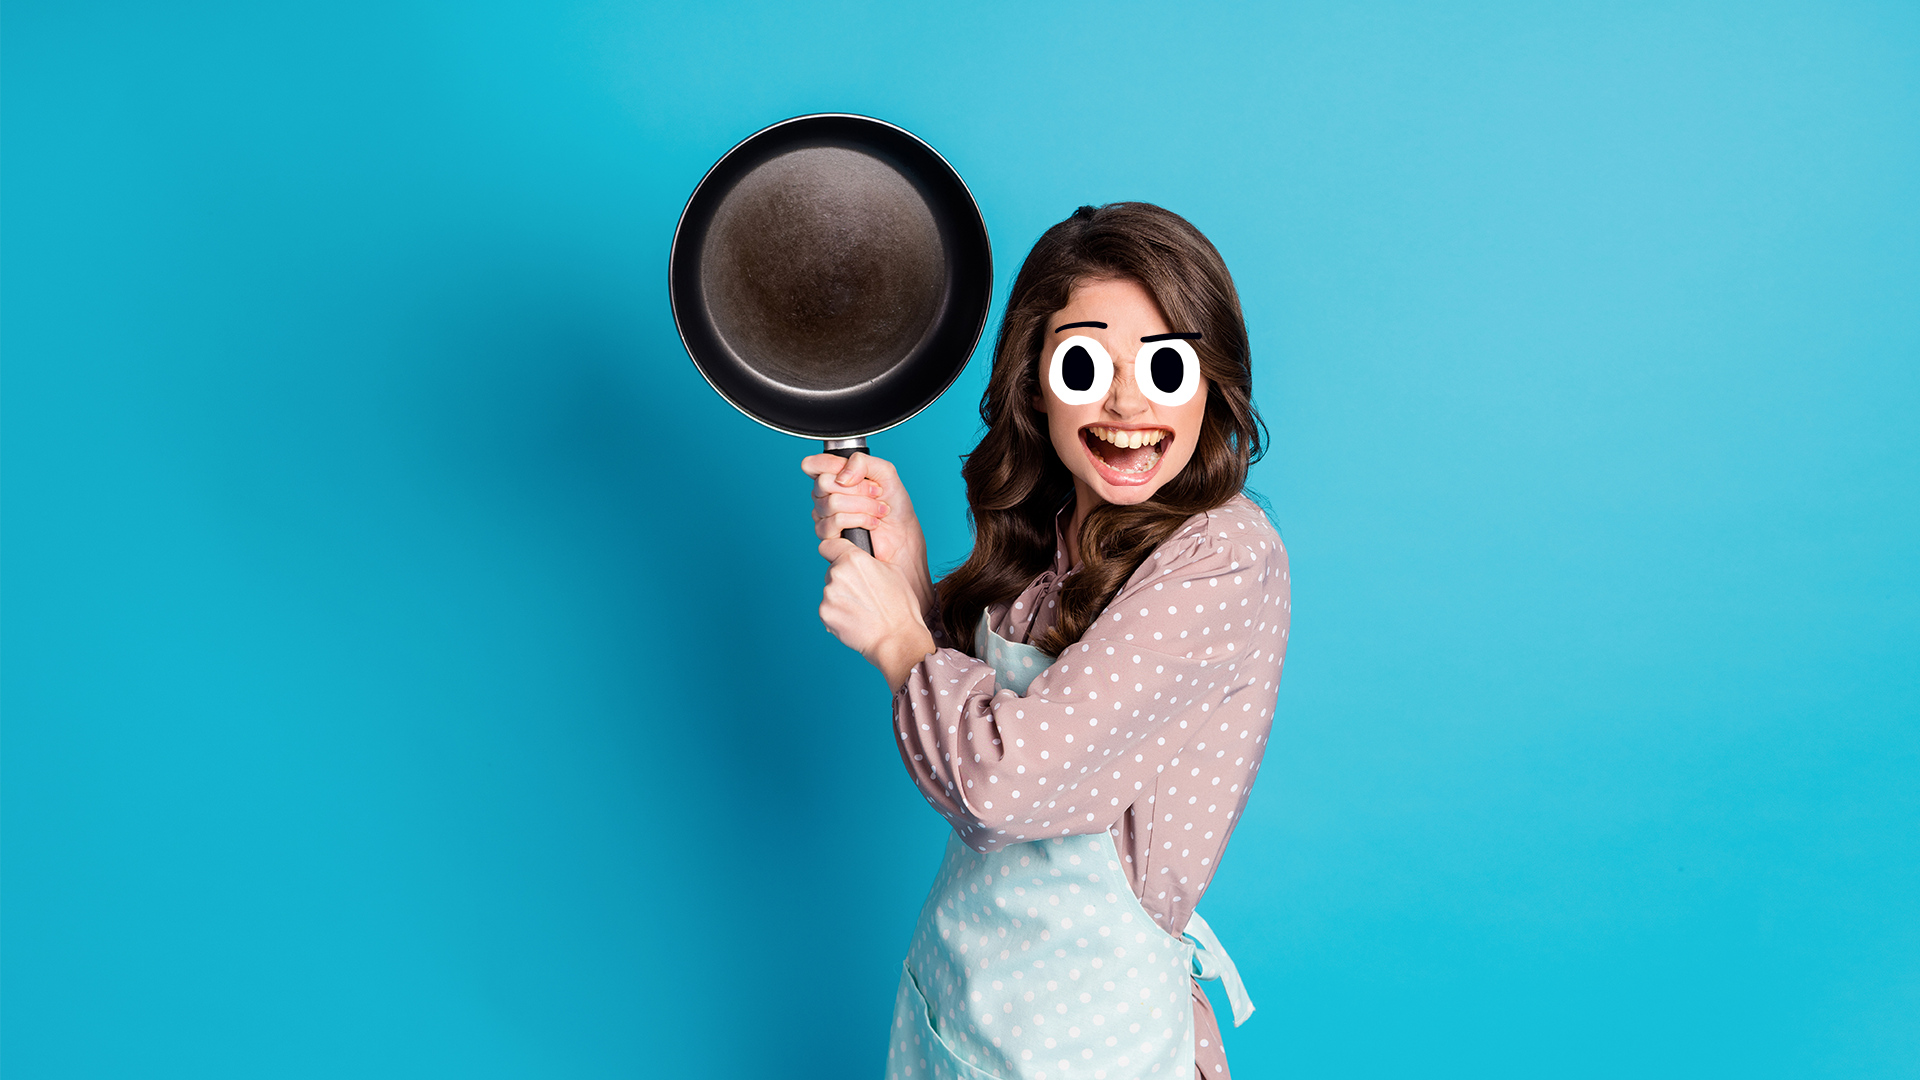 A woman holding a frying pan